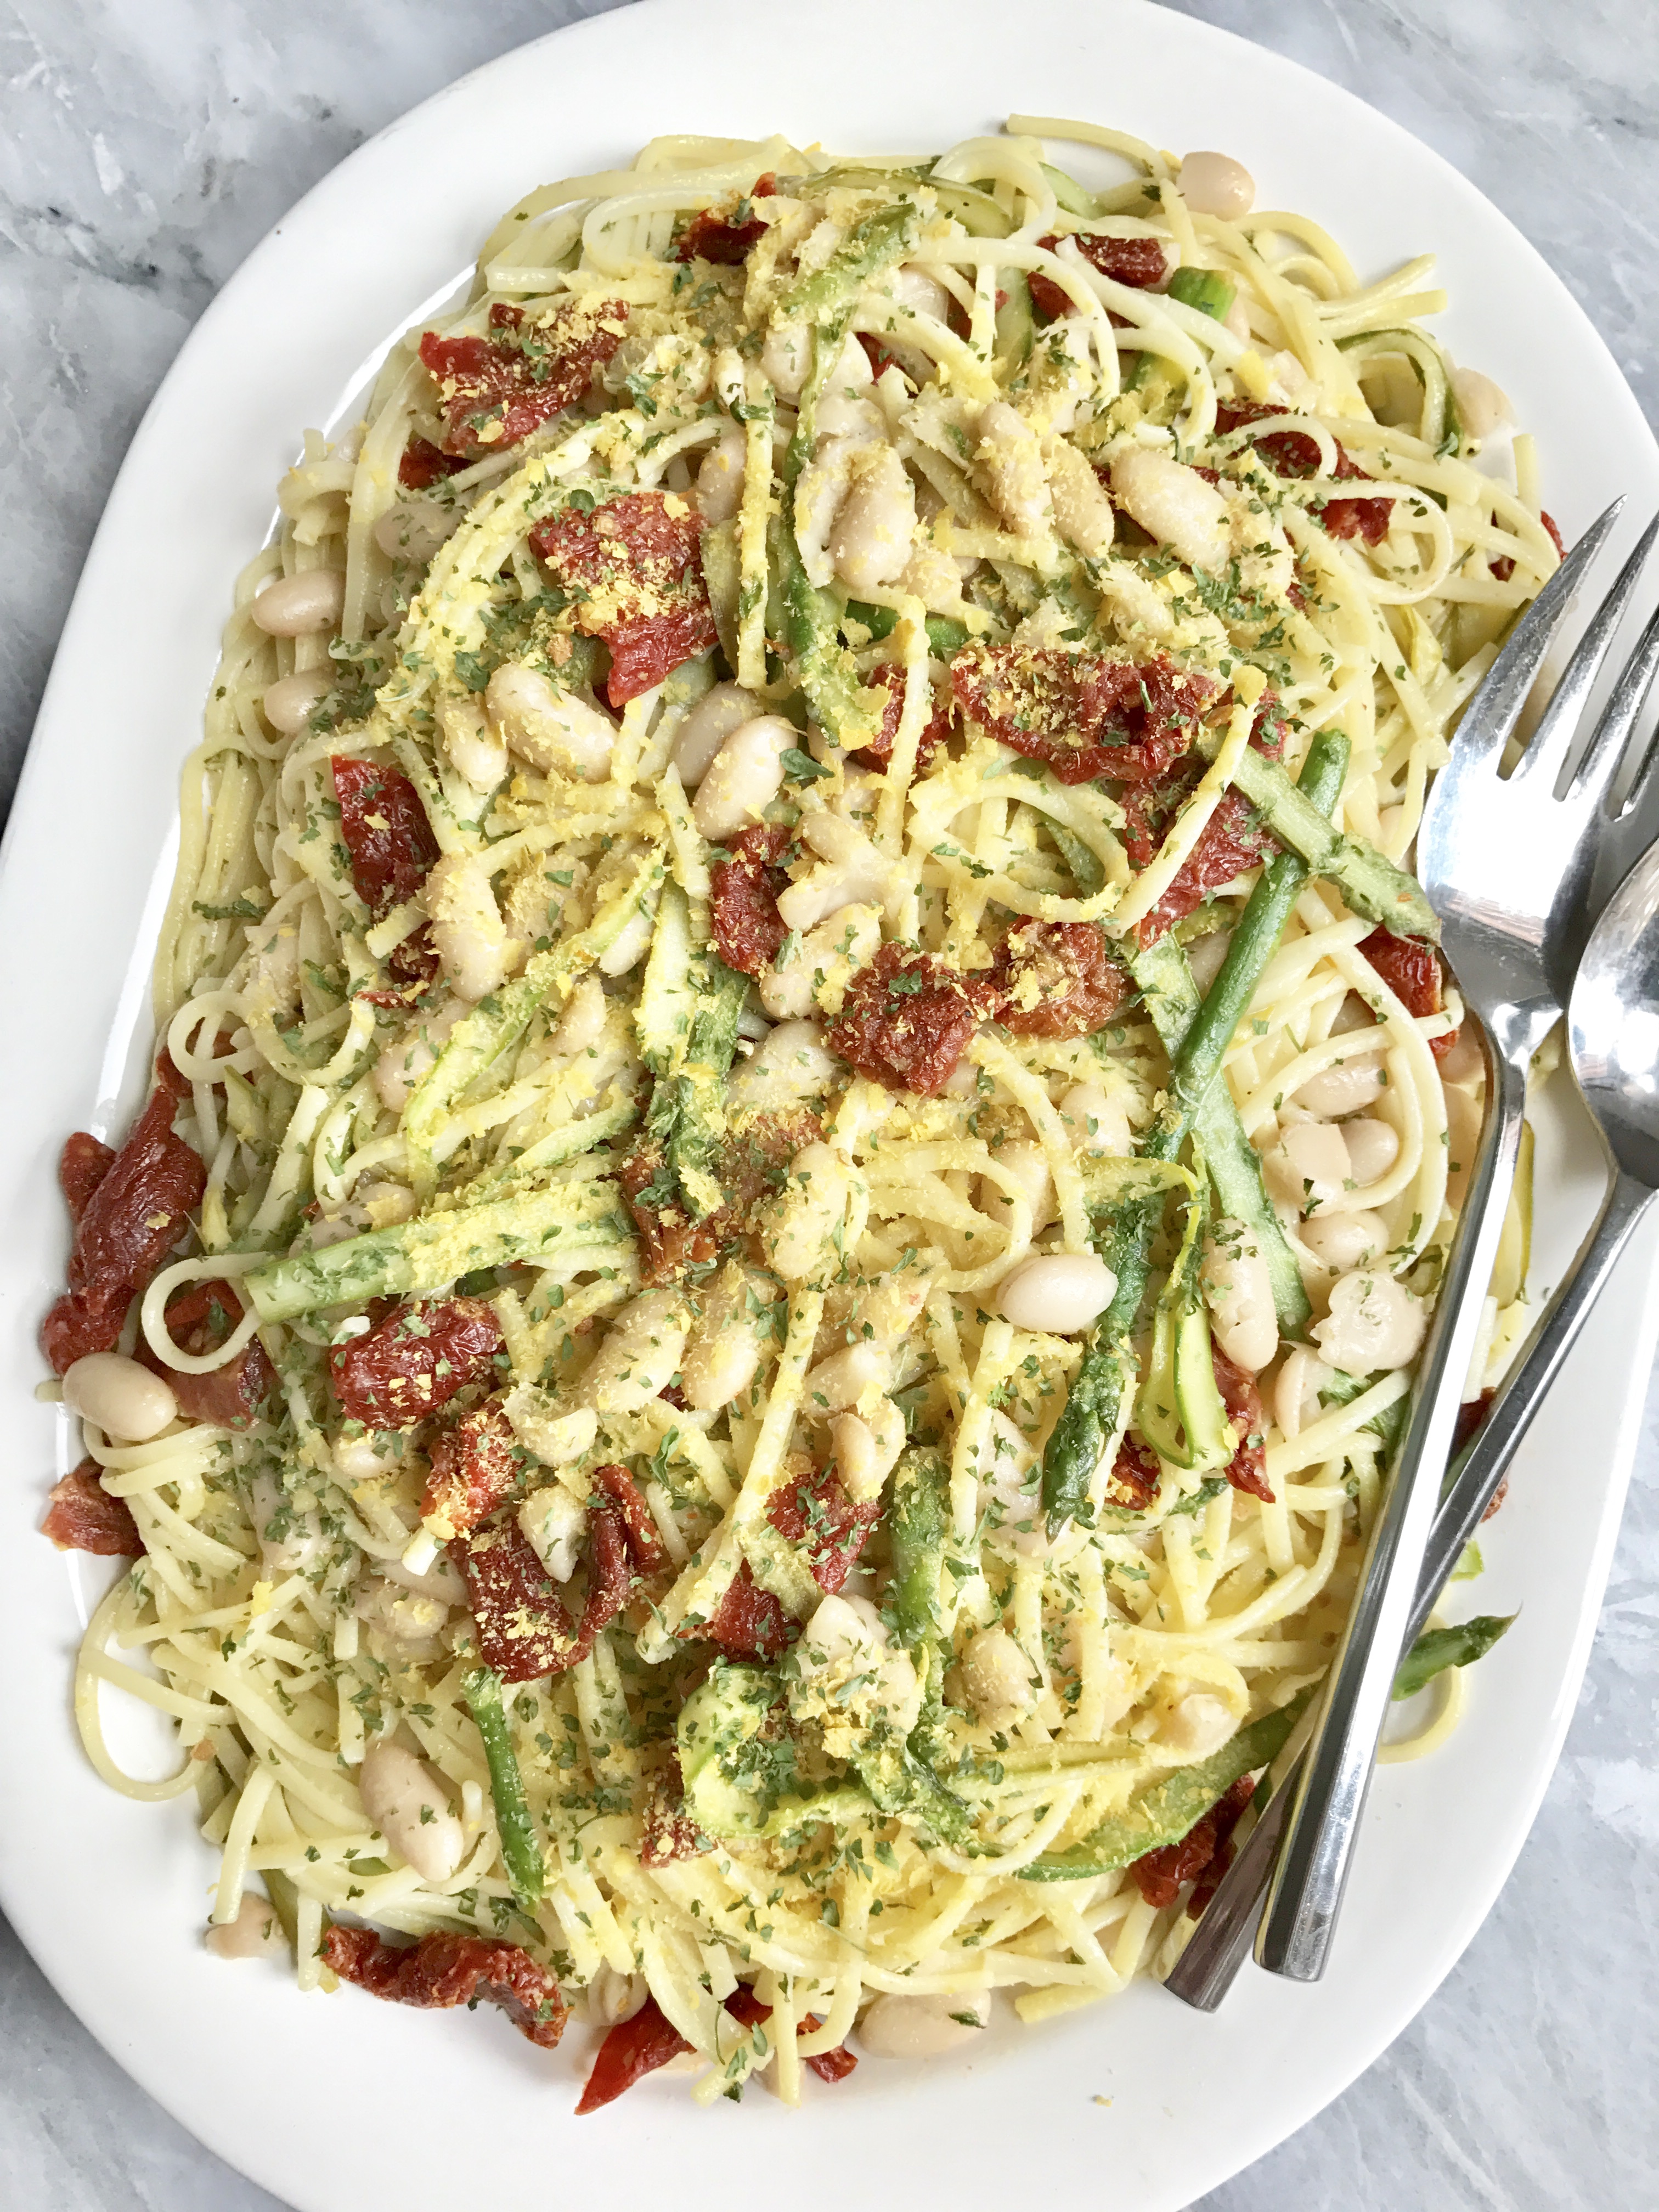 Summer Linguine W/ Shaved Asparagus, White Beans & Sun Dried Tomatoes